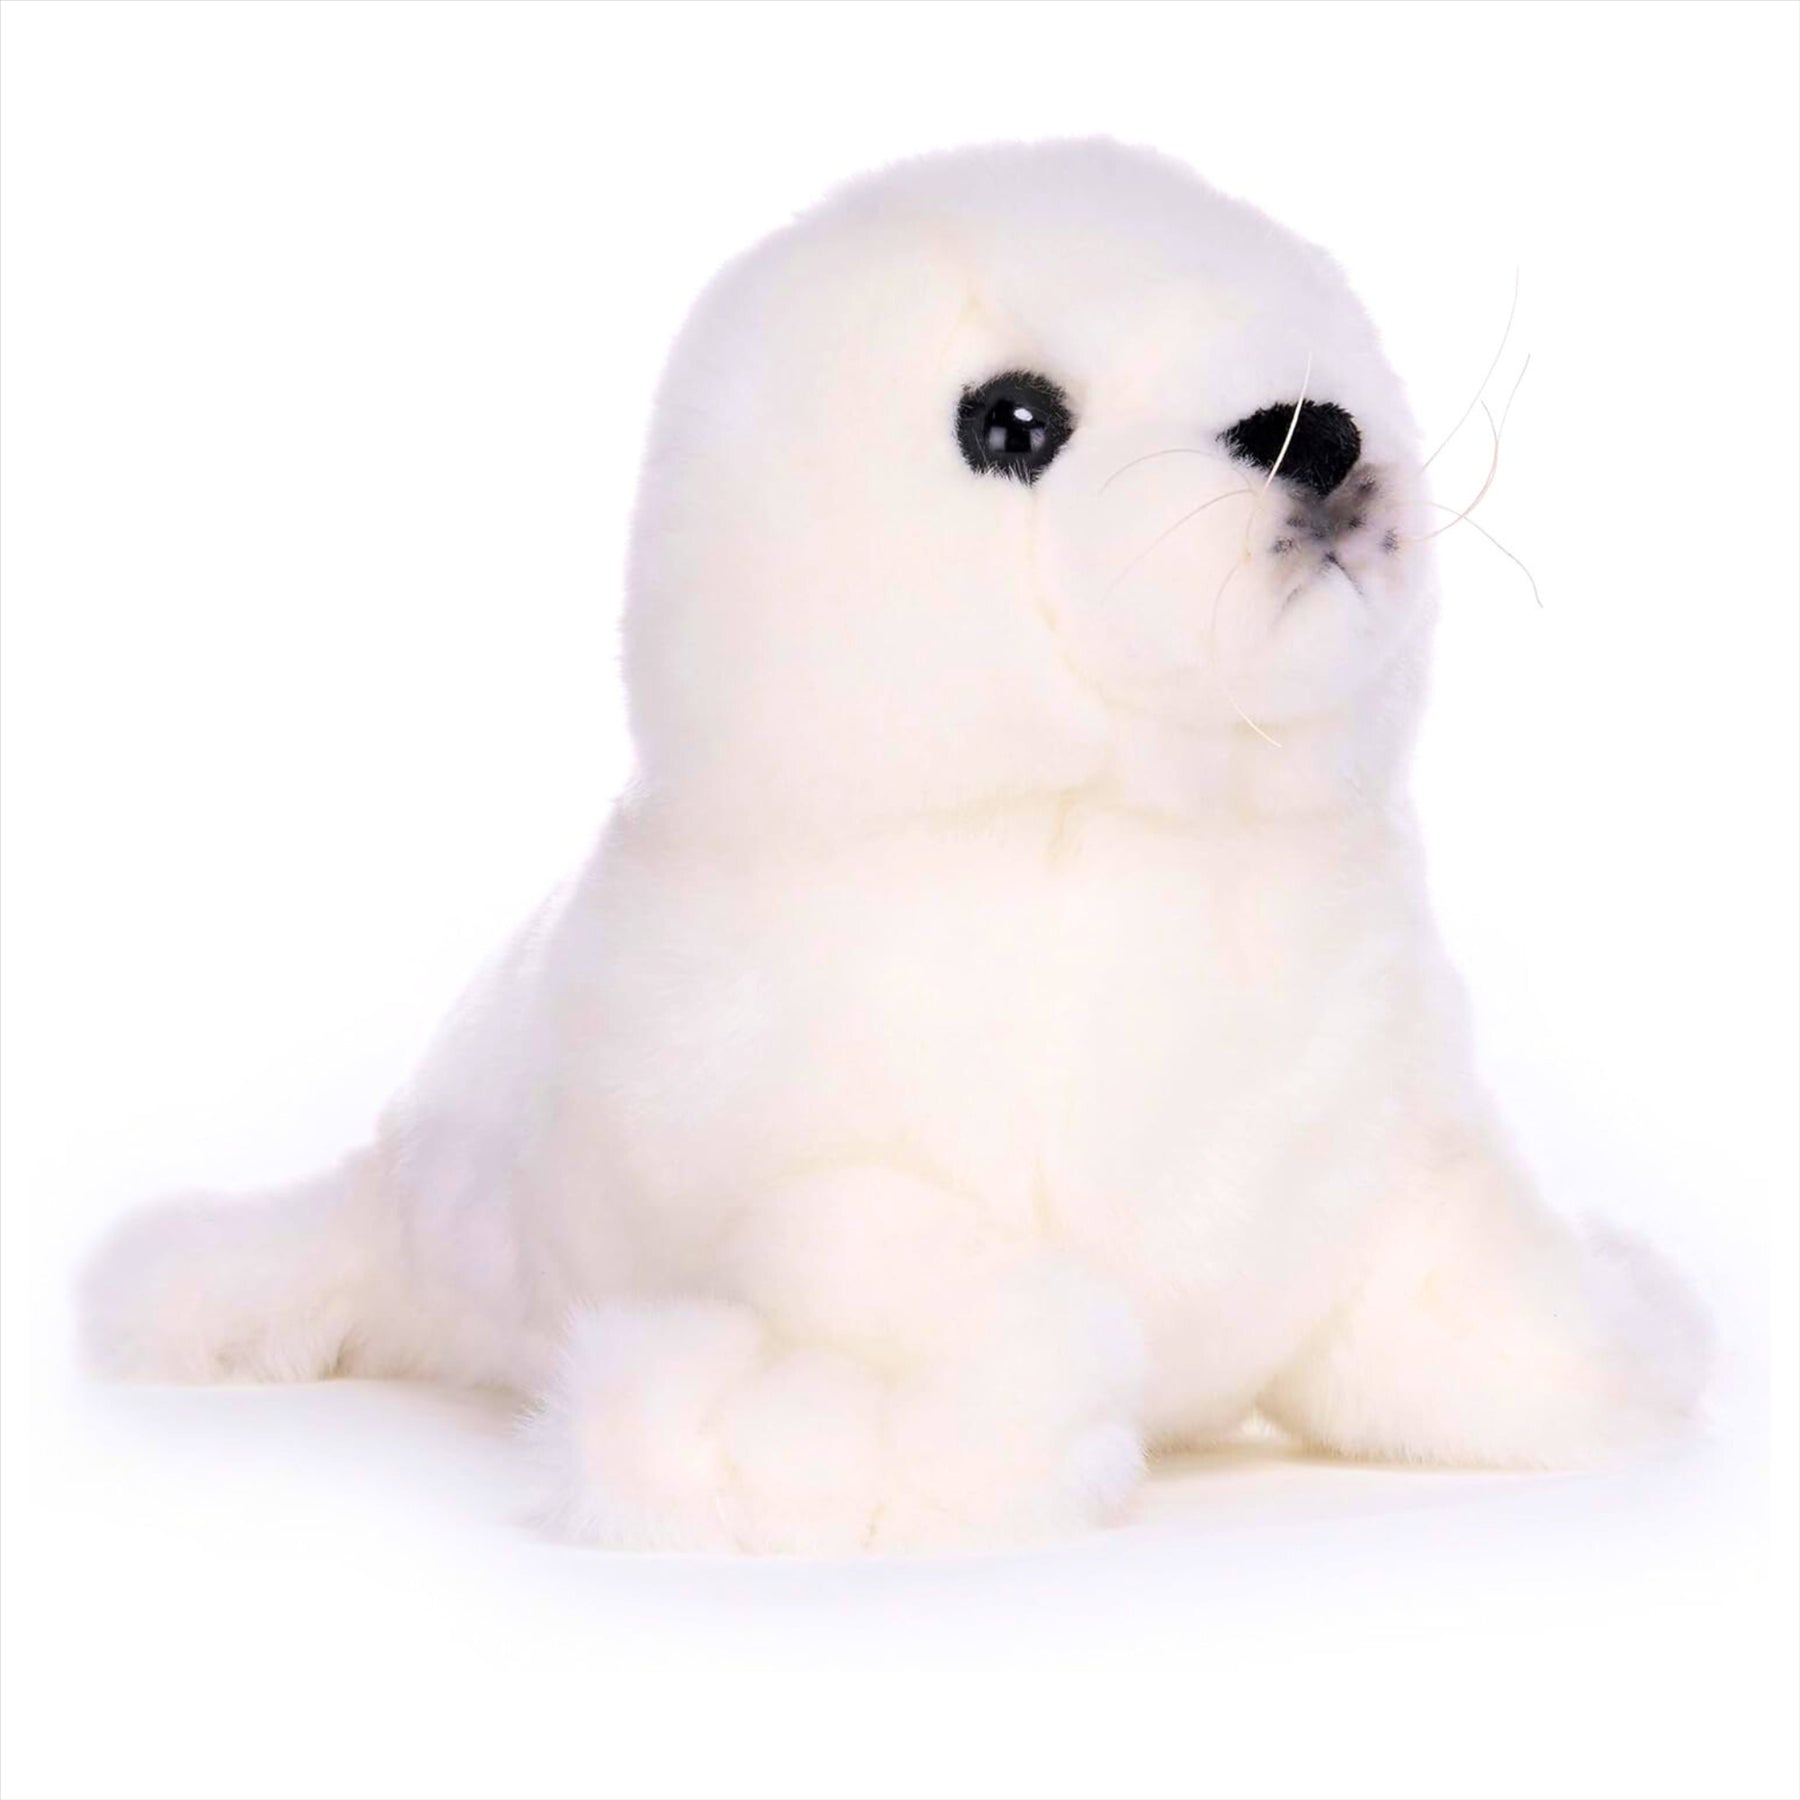 Posh Paws BBC Earth Collection Seal Pup Super Soft Plush Toy 25cm 10"